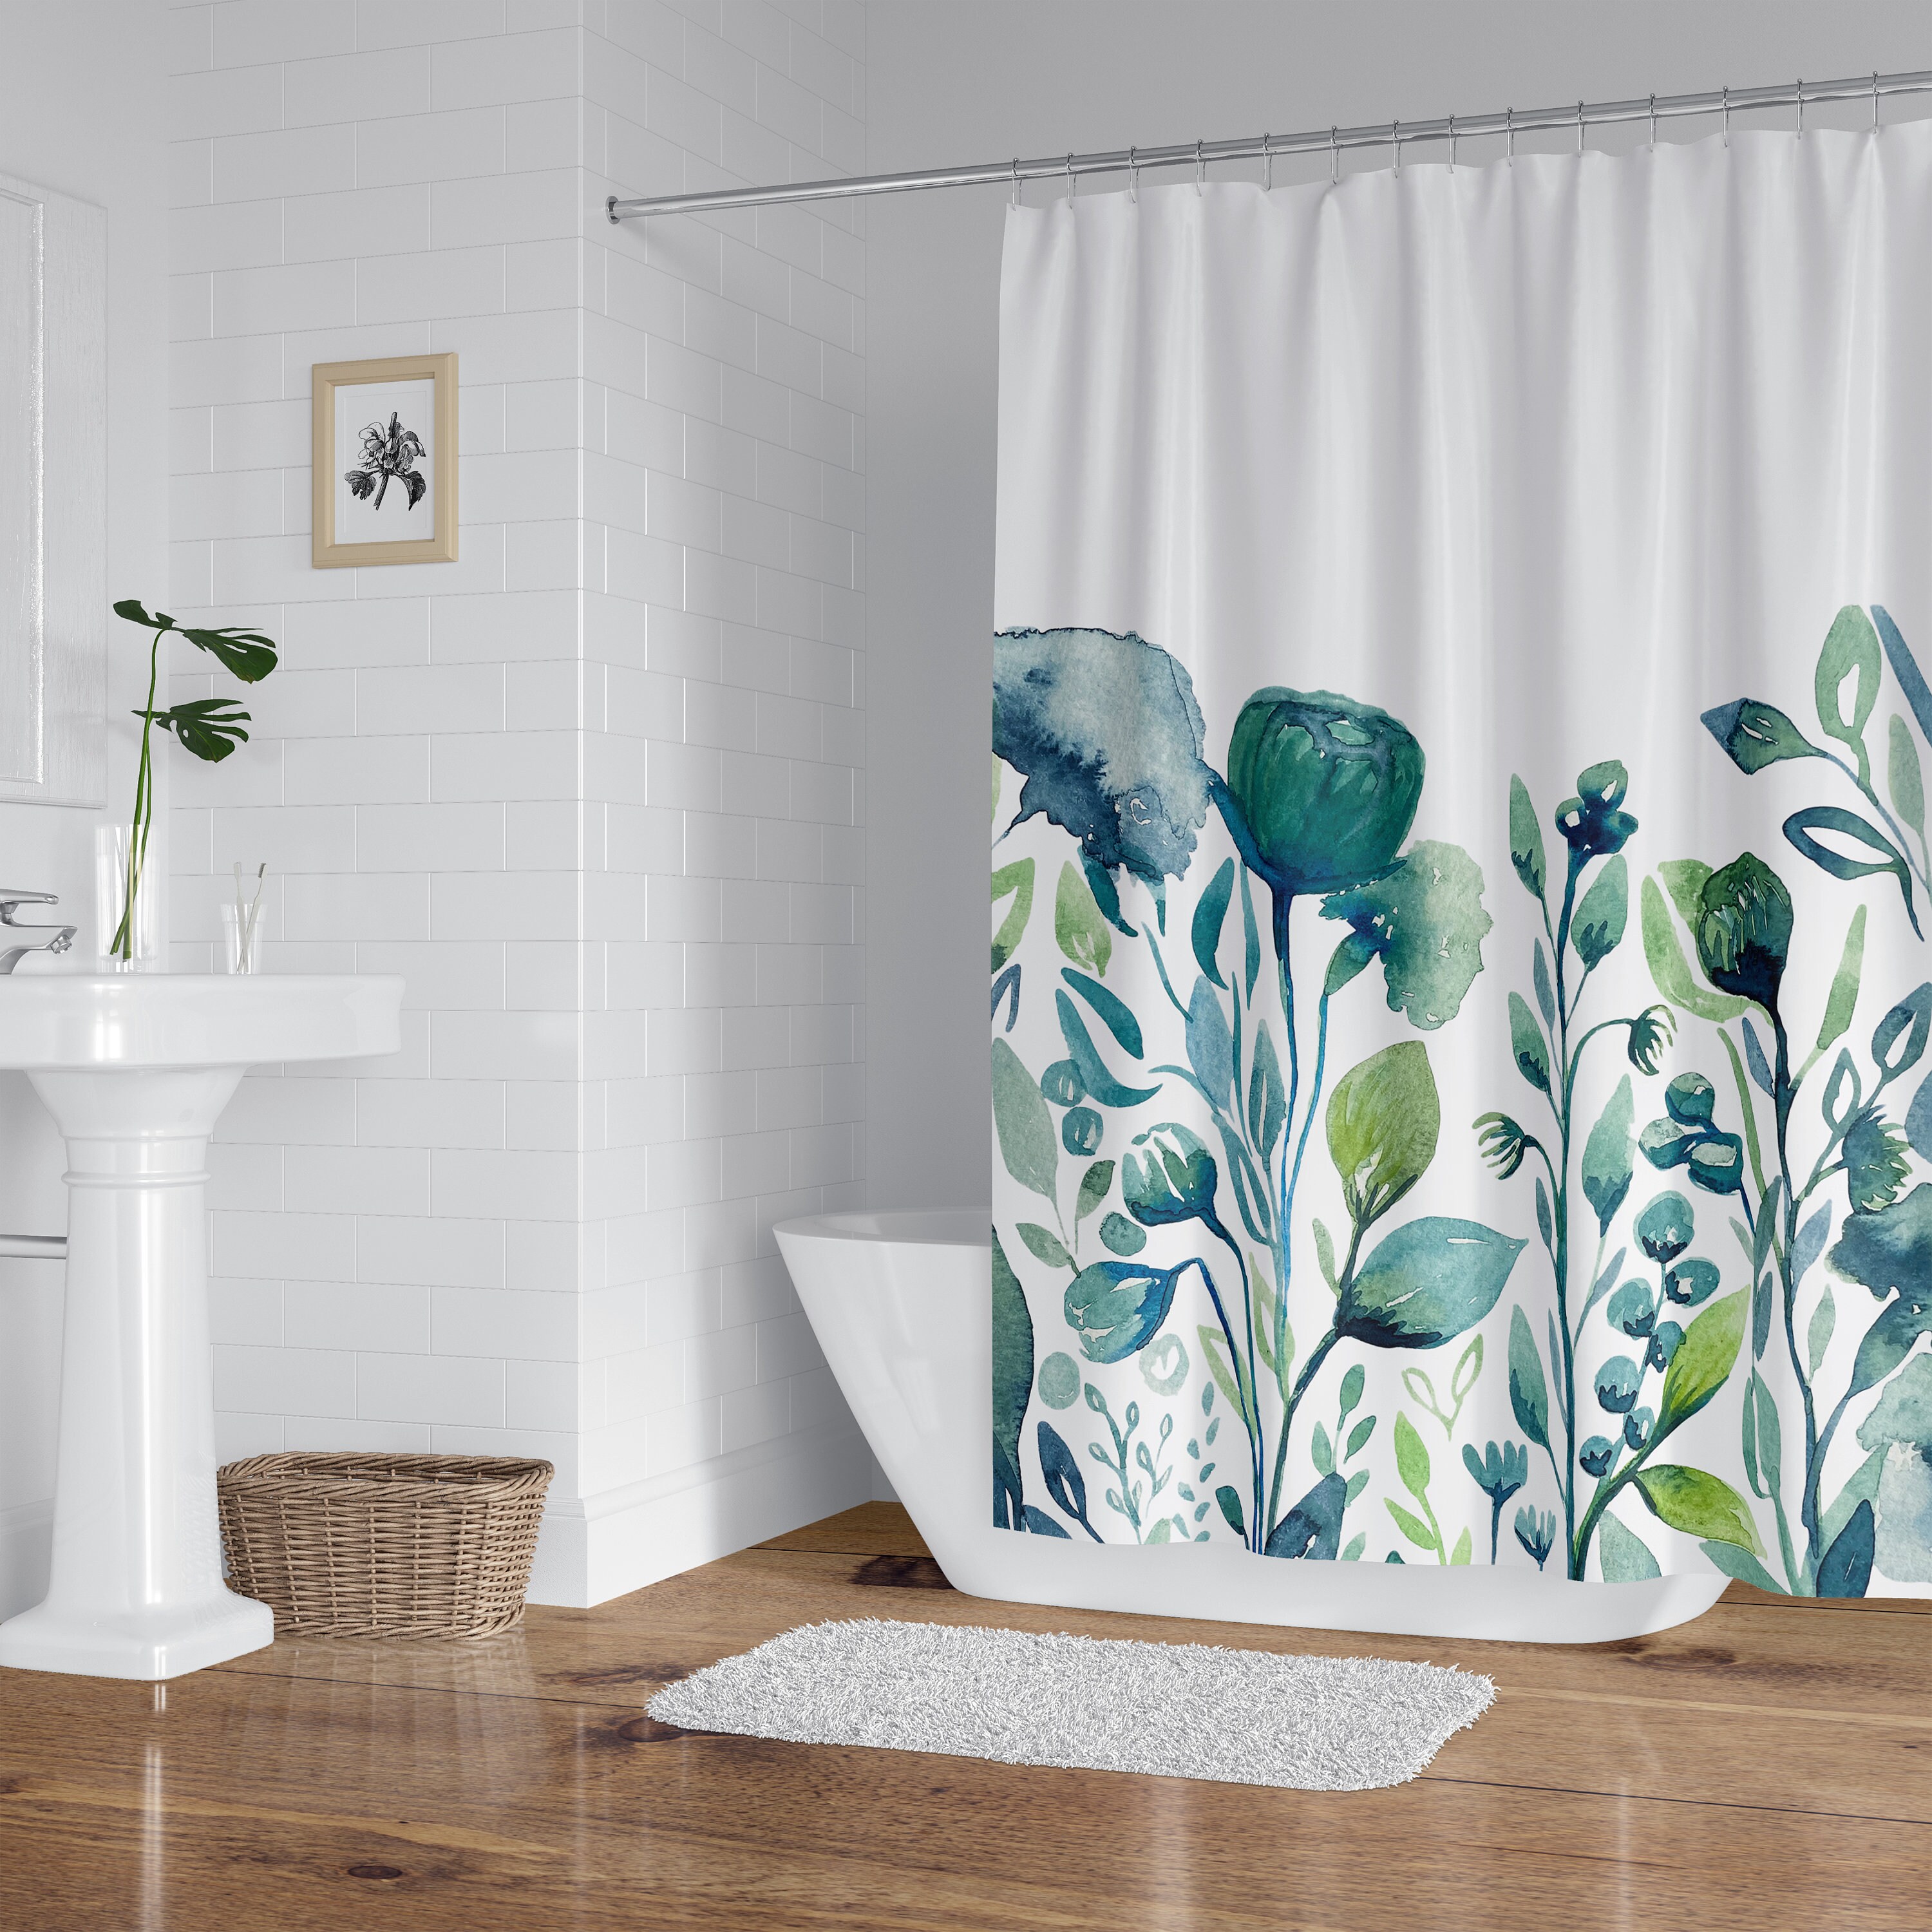 Blue Cream Floral Leaves Shower Curtain Pictorial Squares New 